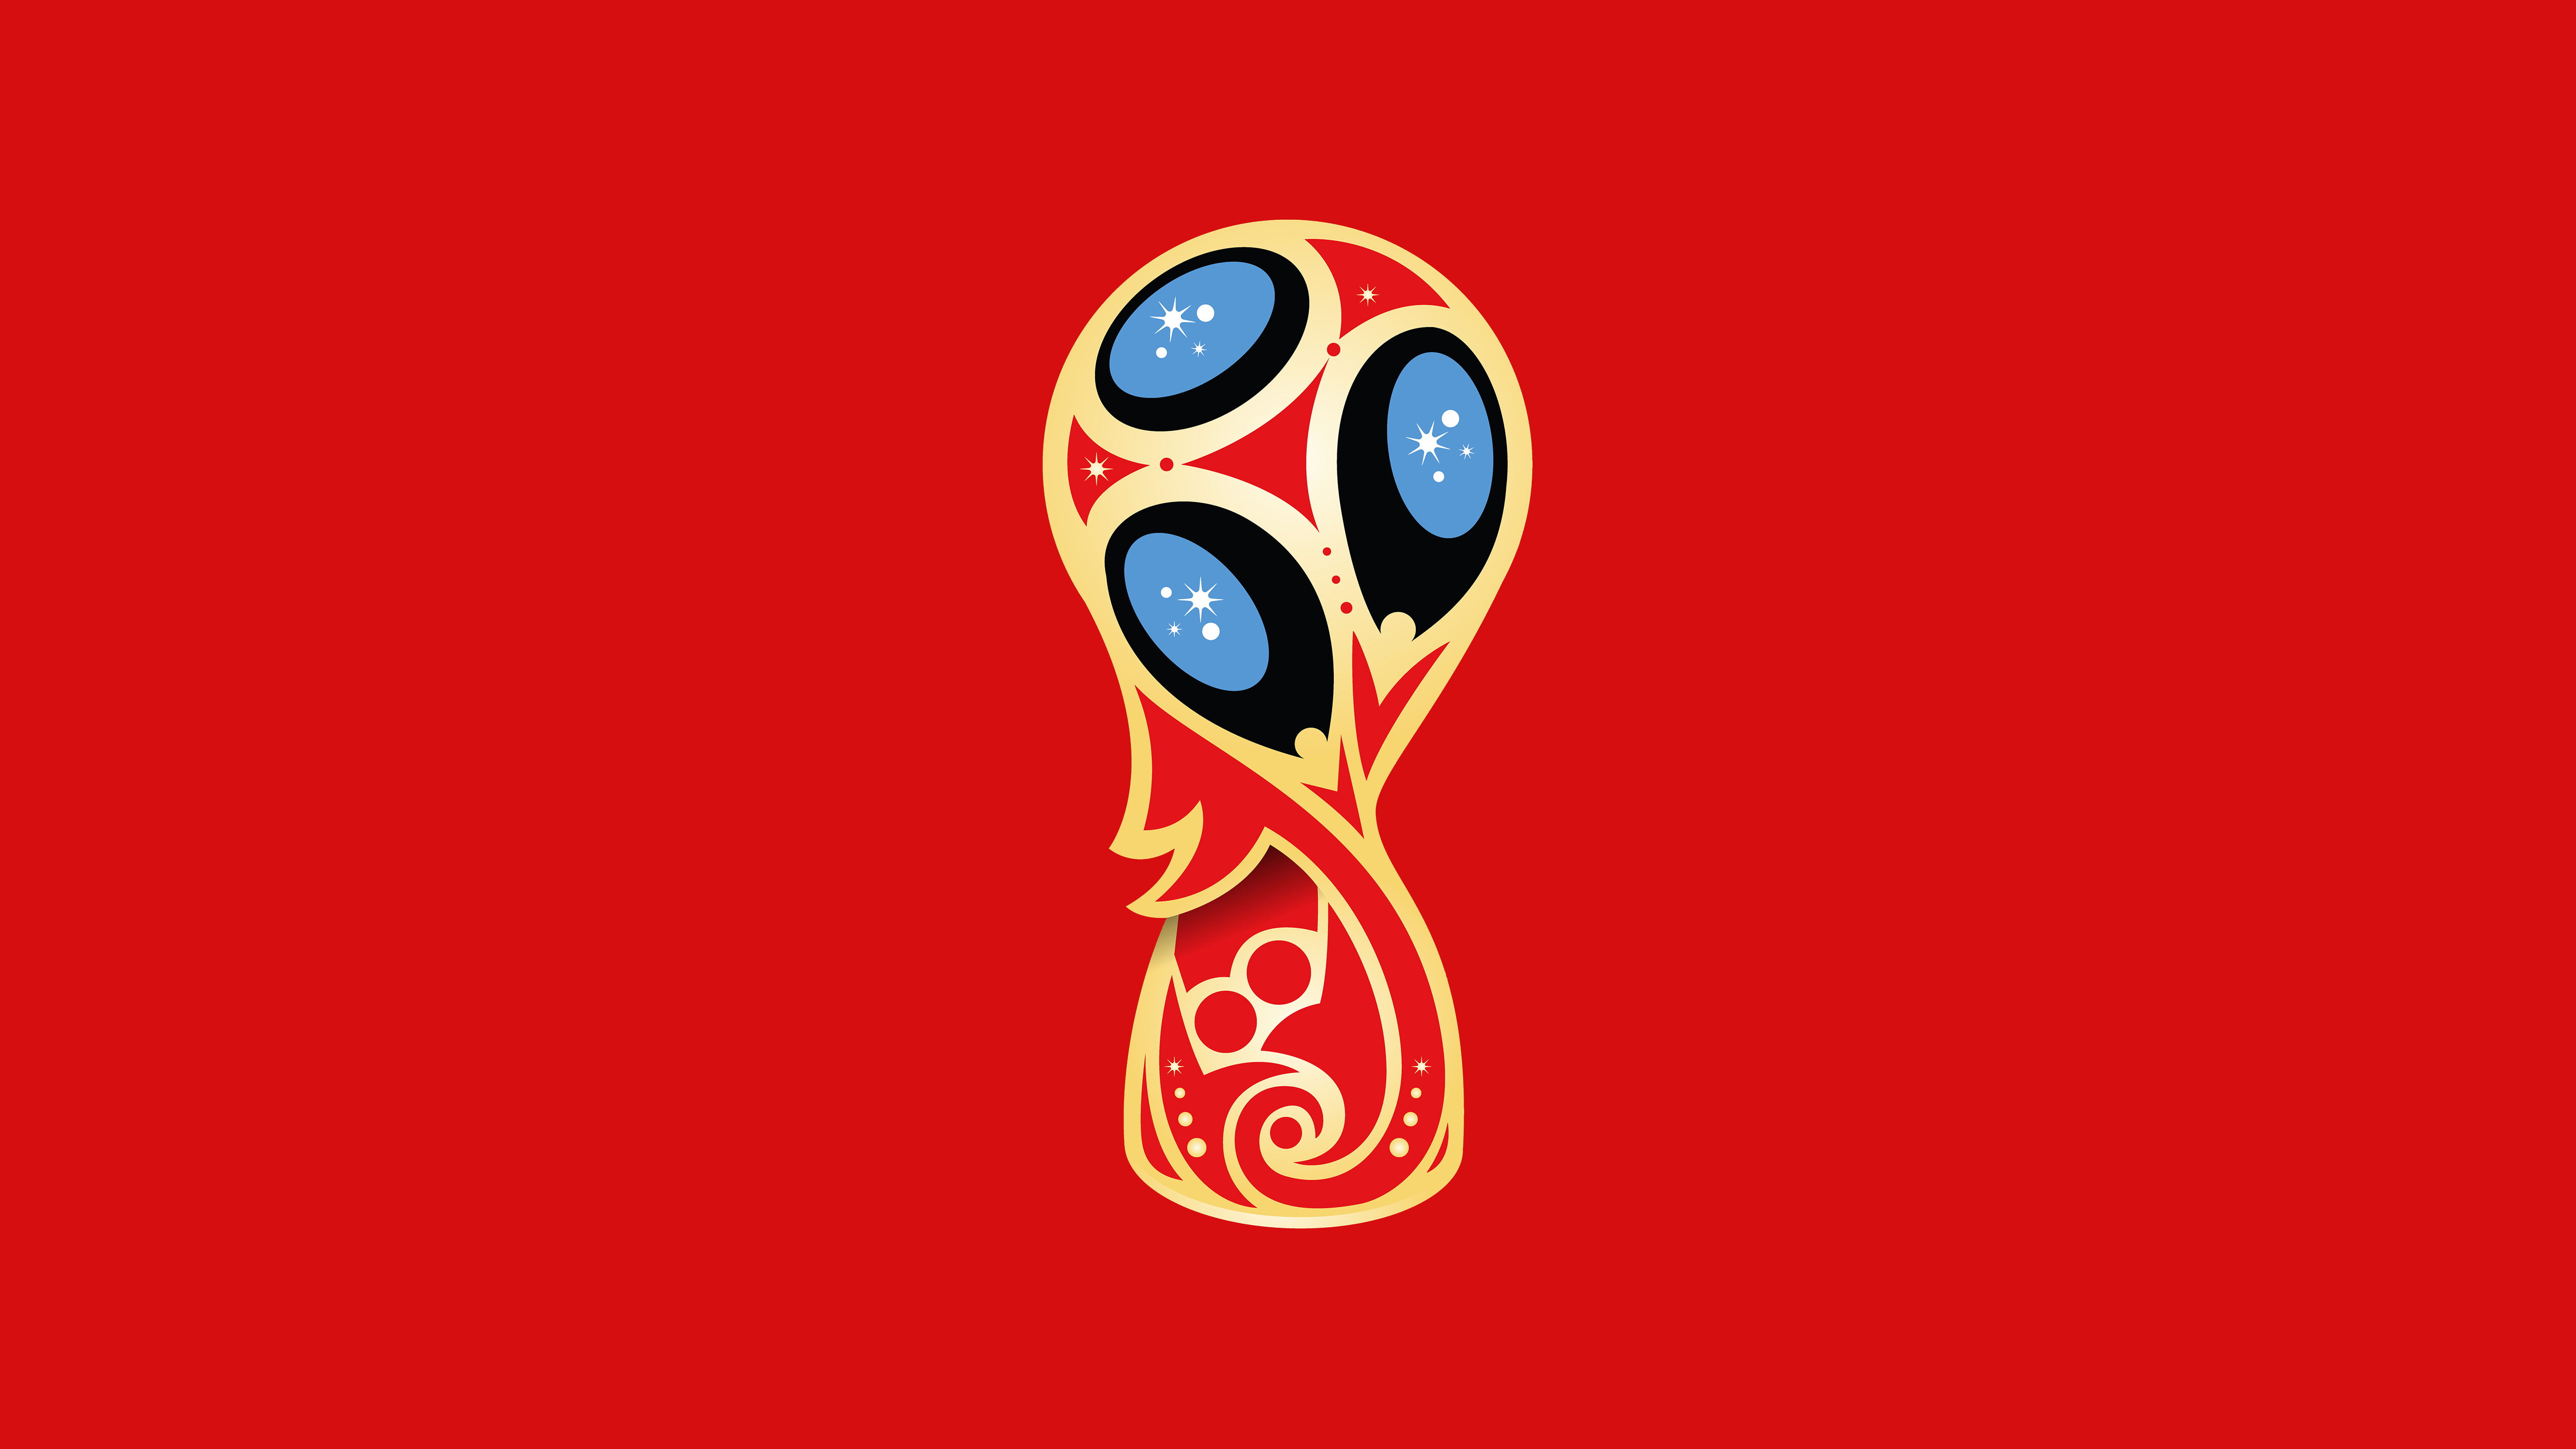 Red, 5K, Minimal, Trophy, 2018 FIFA World Cup, Russia, colored background